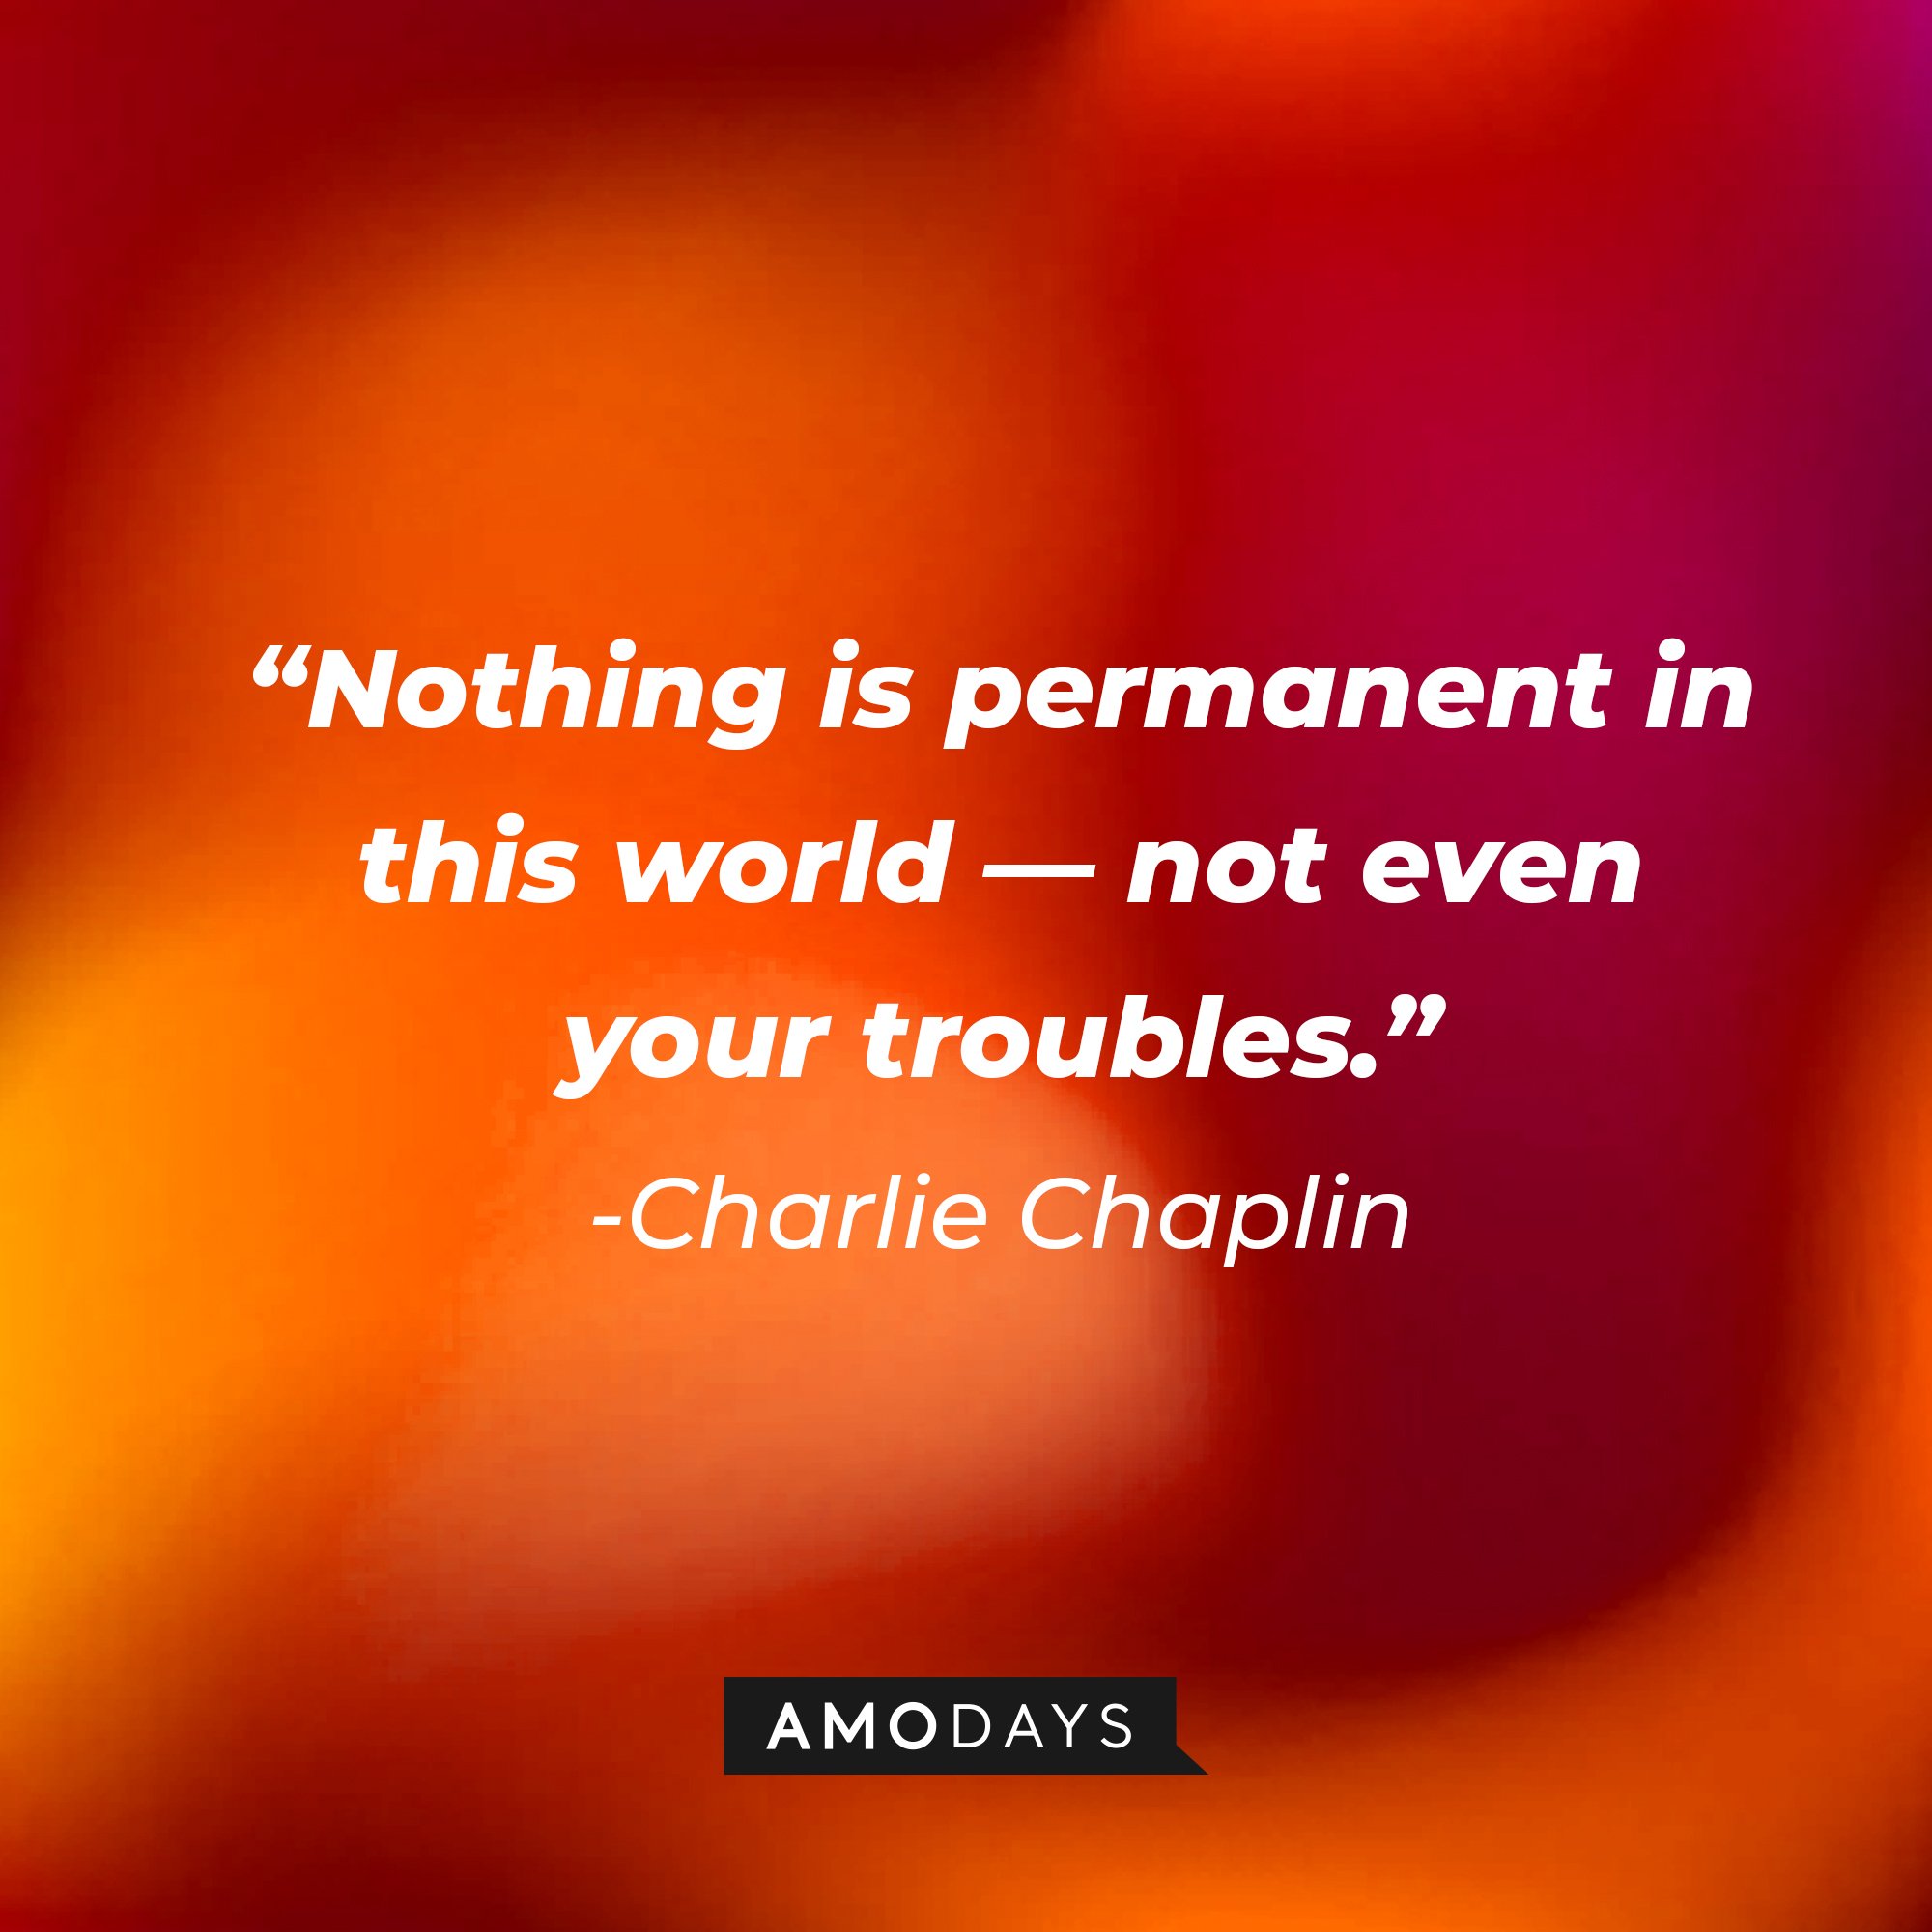 Charlie Chaplin ‘s quote: “Nothing is permanent in this world—not even your troubles.”  | Image: AmoDays